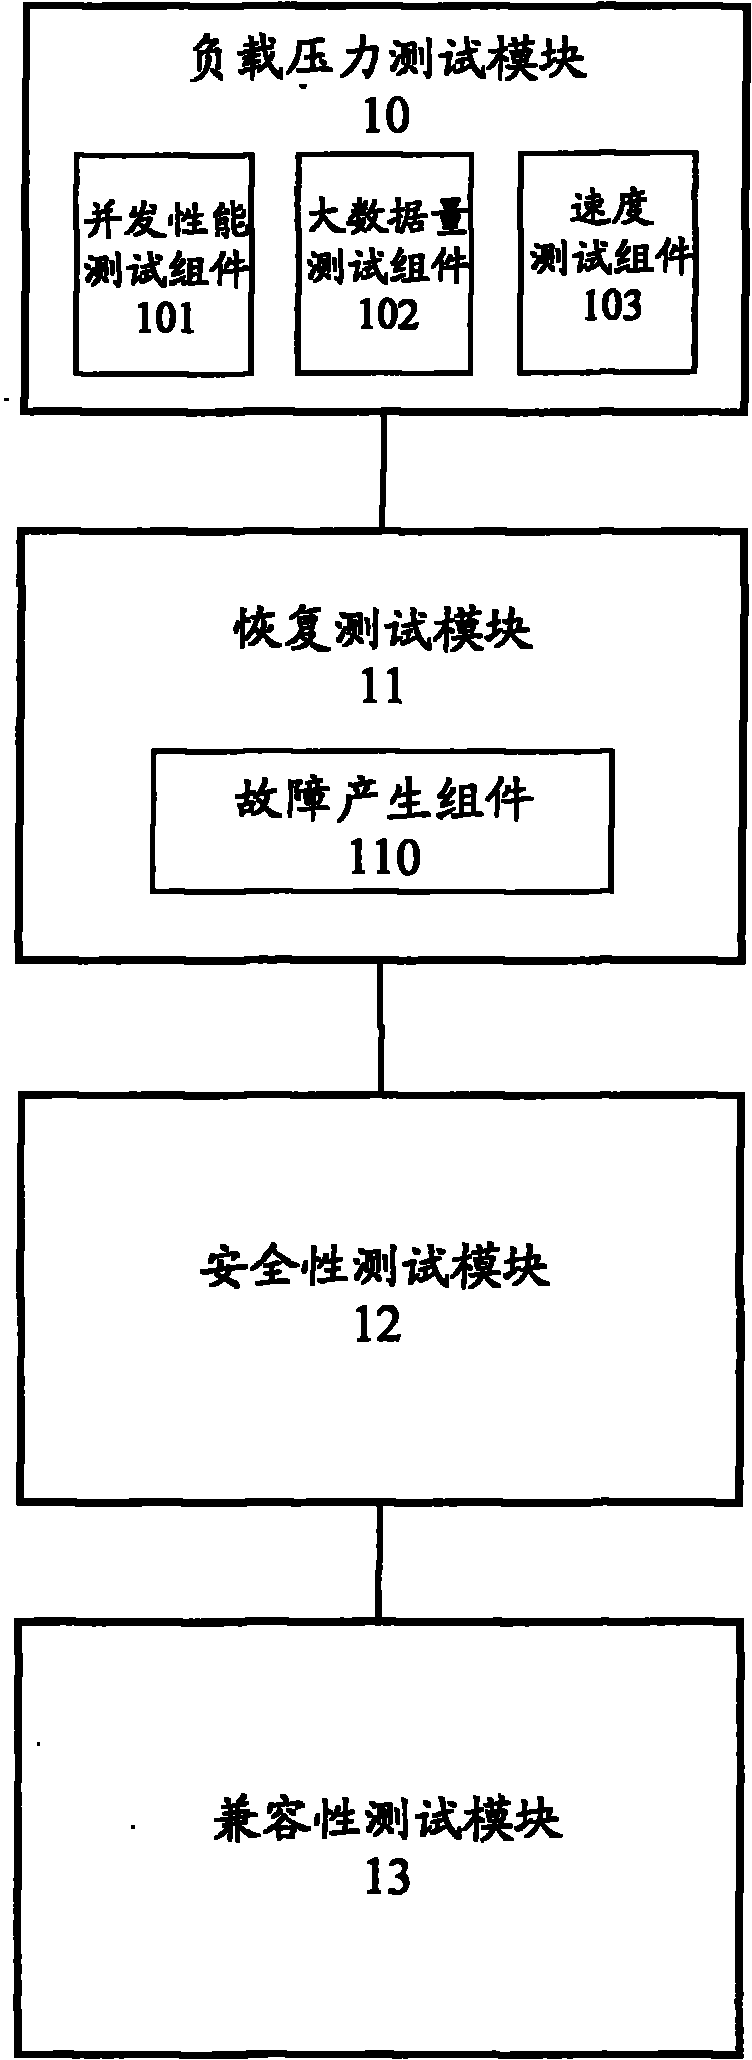 Auxiliary testing device for software system